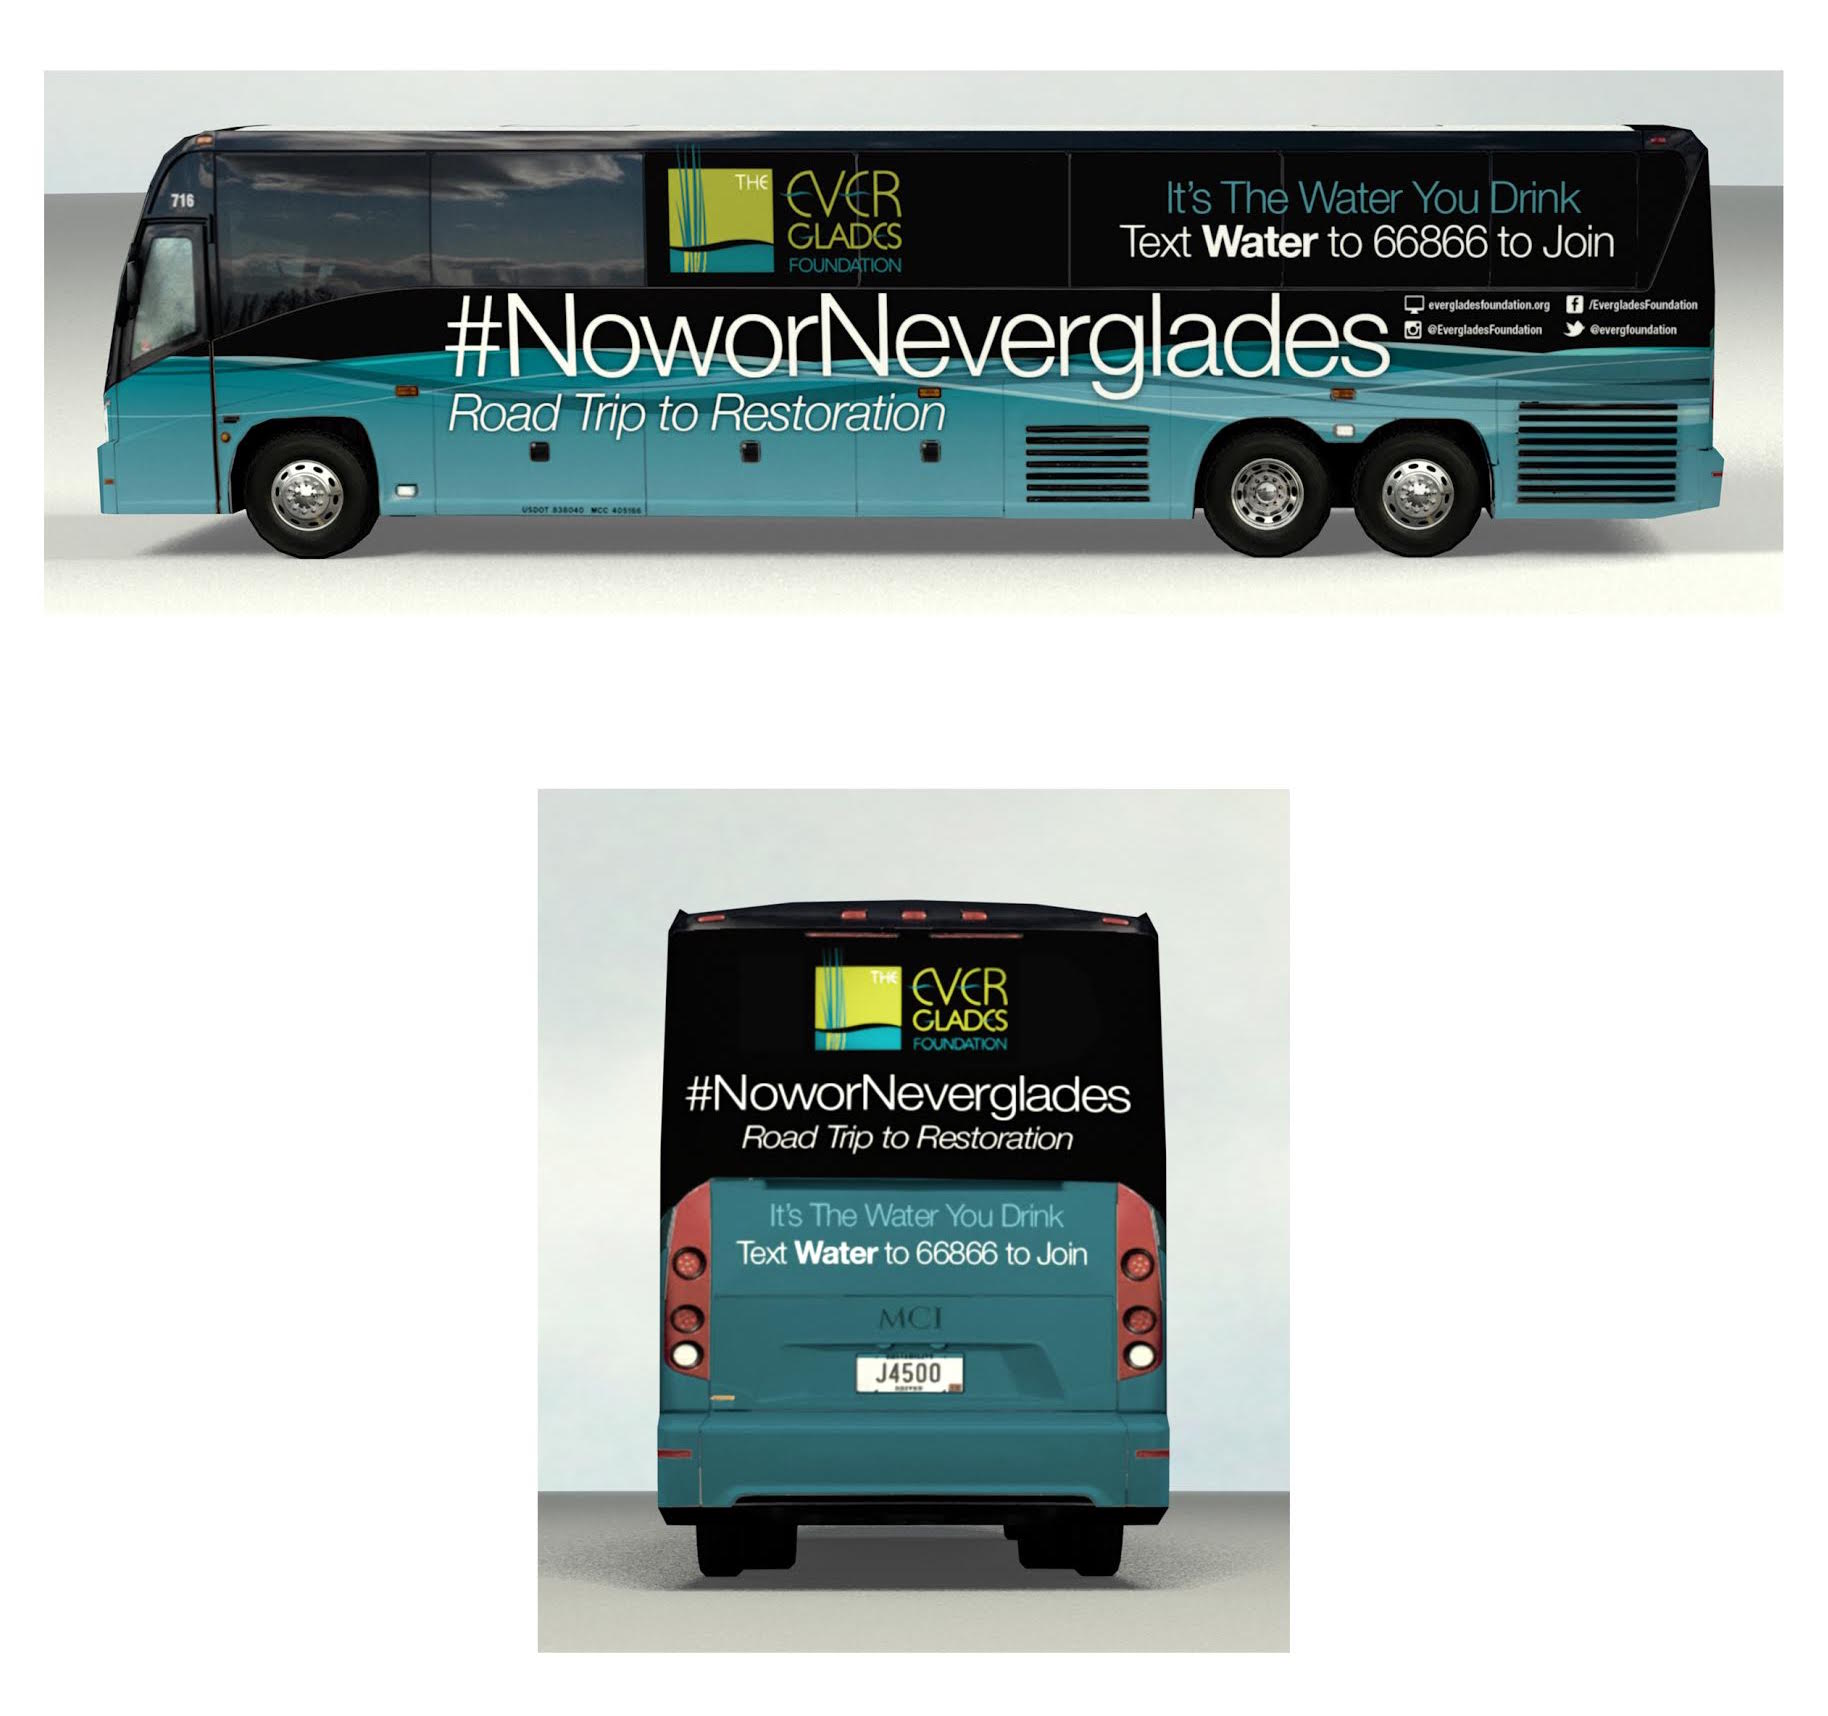 THE EVERGLADES FOUNDATION LAUNCHES 12-DAY, 20-CITY BUS TOUR